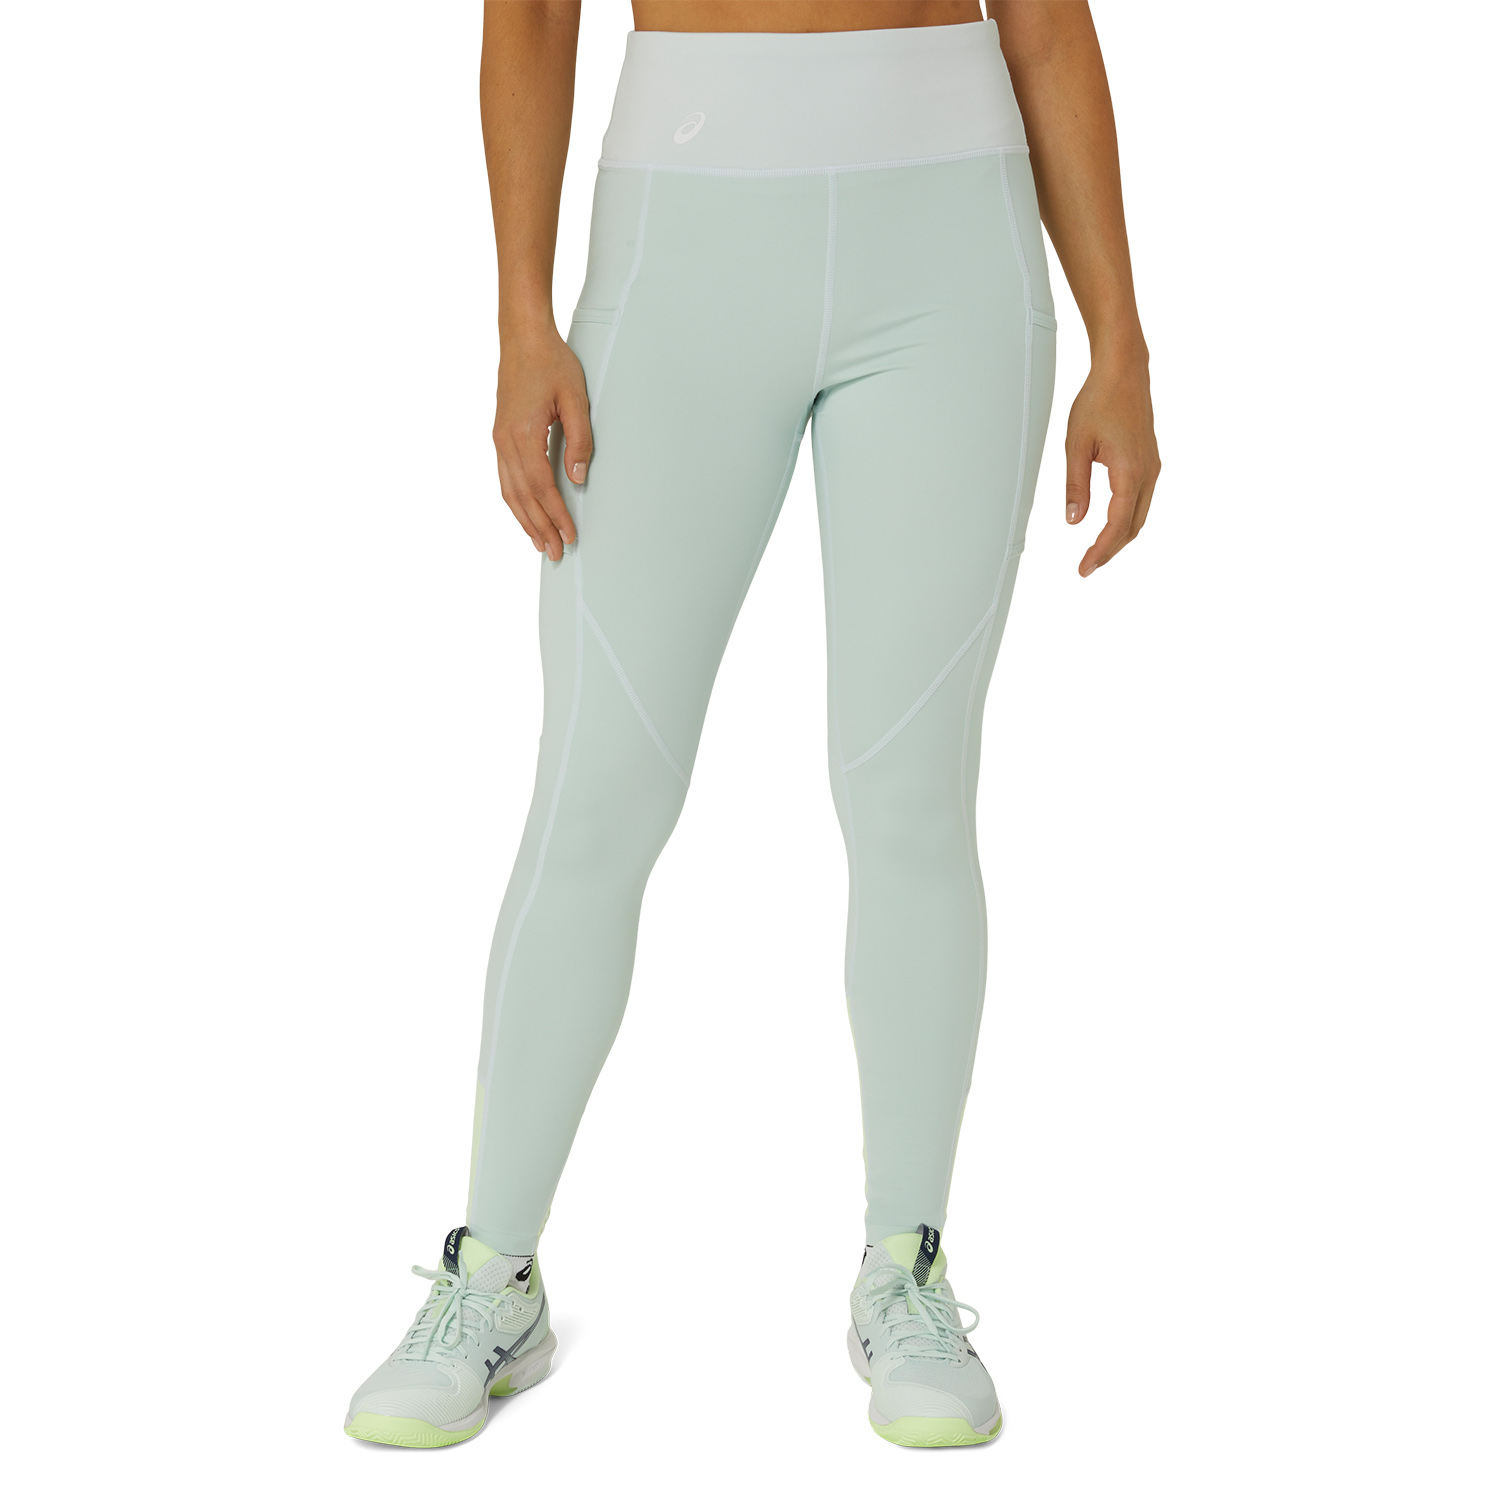 Asics Court Tights - Pale Blue